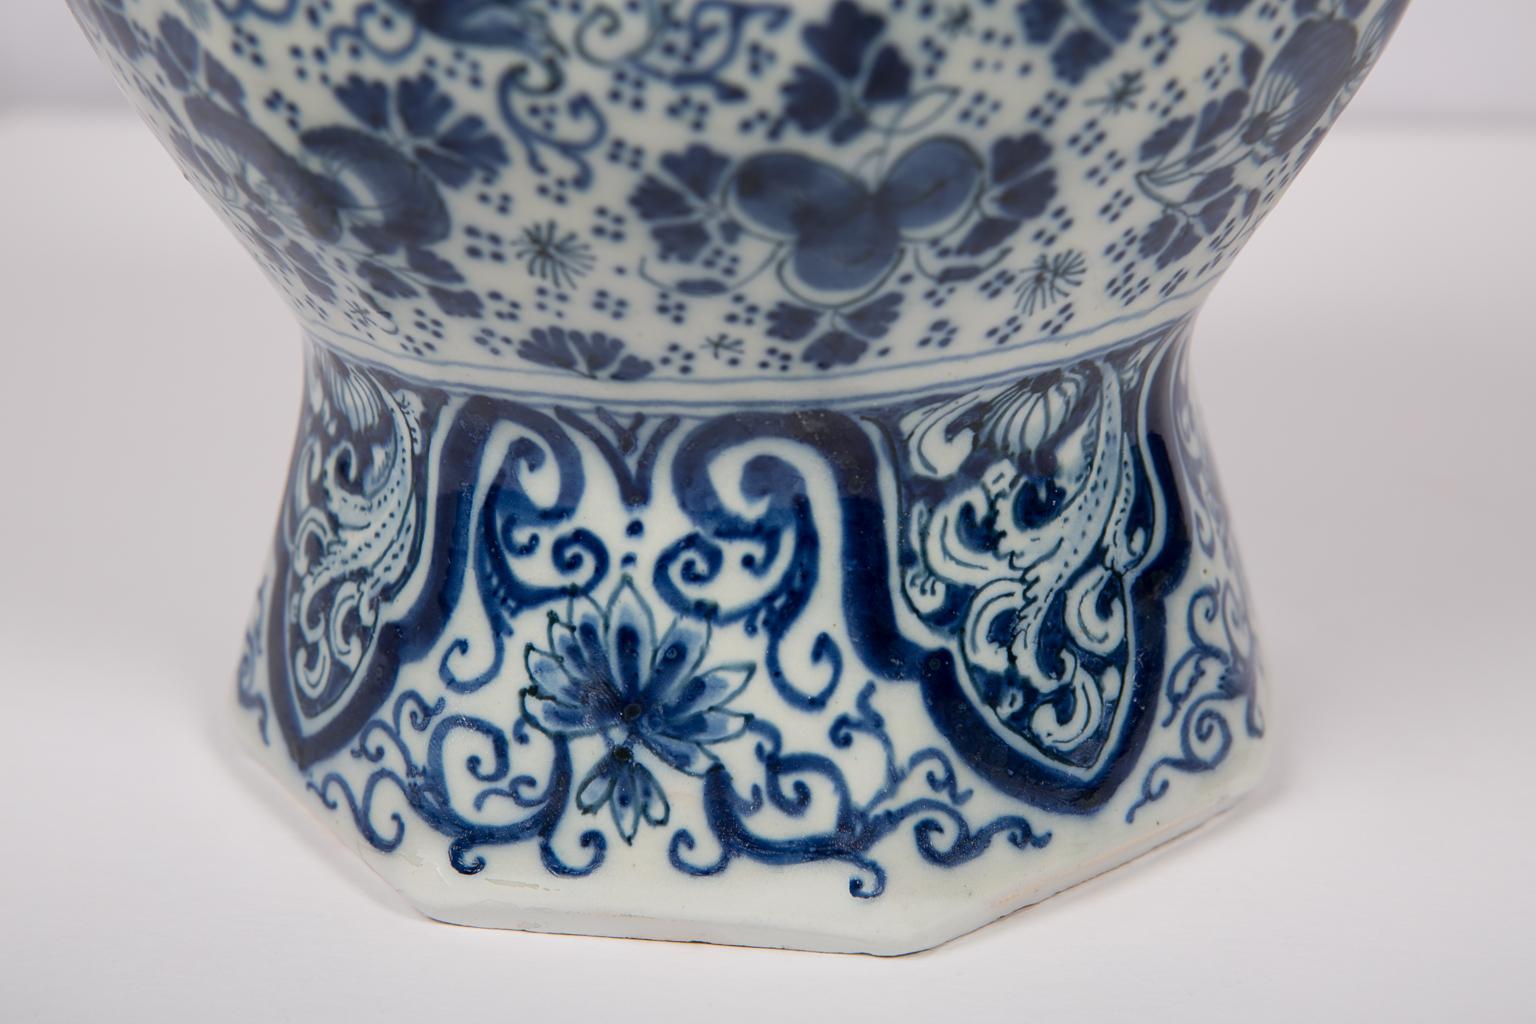 Dutch Antique Delft Blue and White Vase Large Hand-Painted Made circa 1700